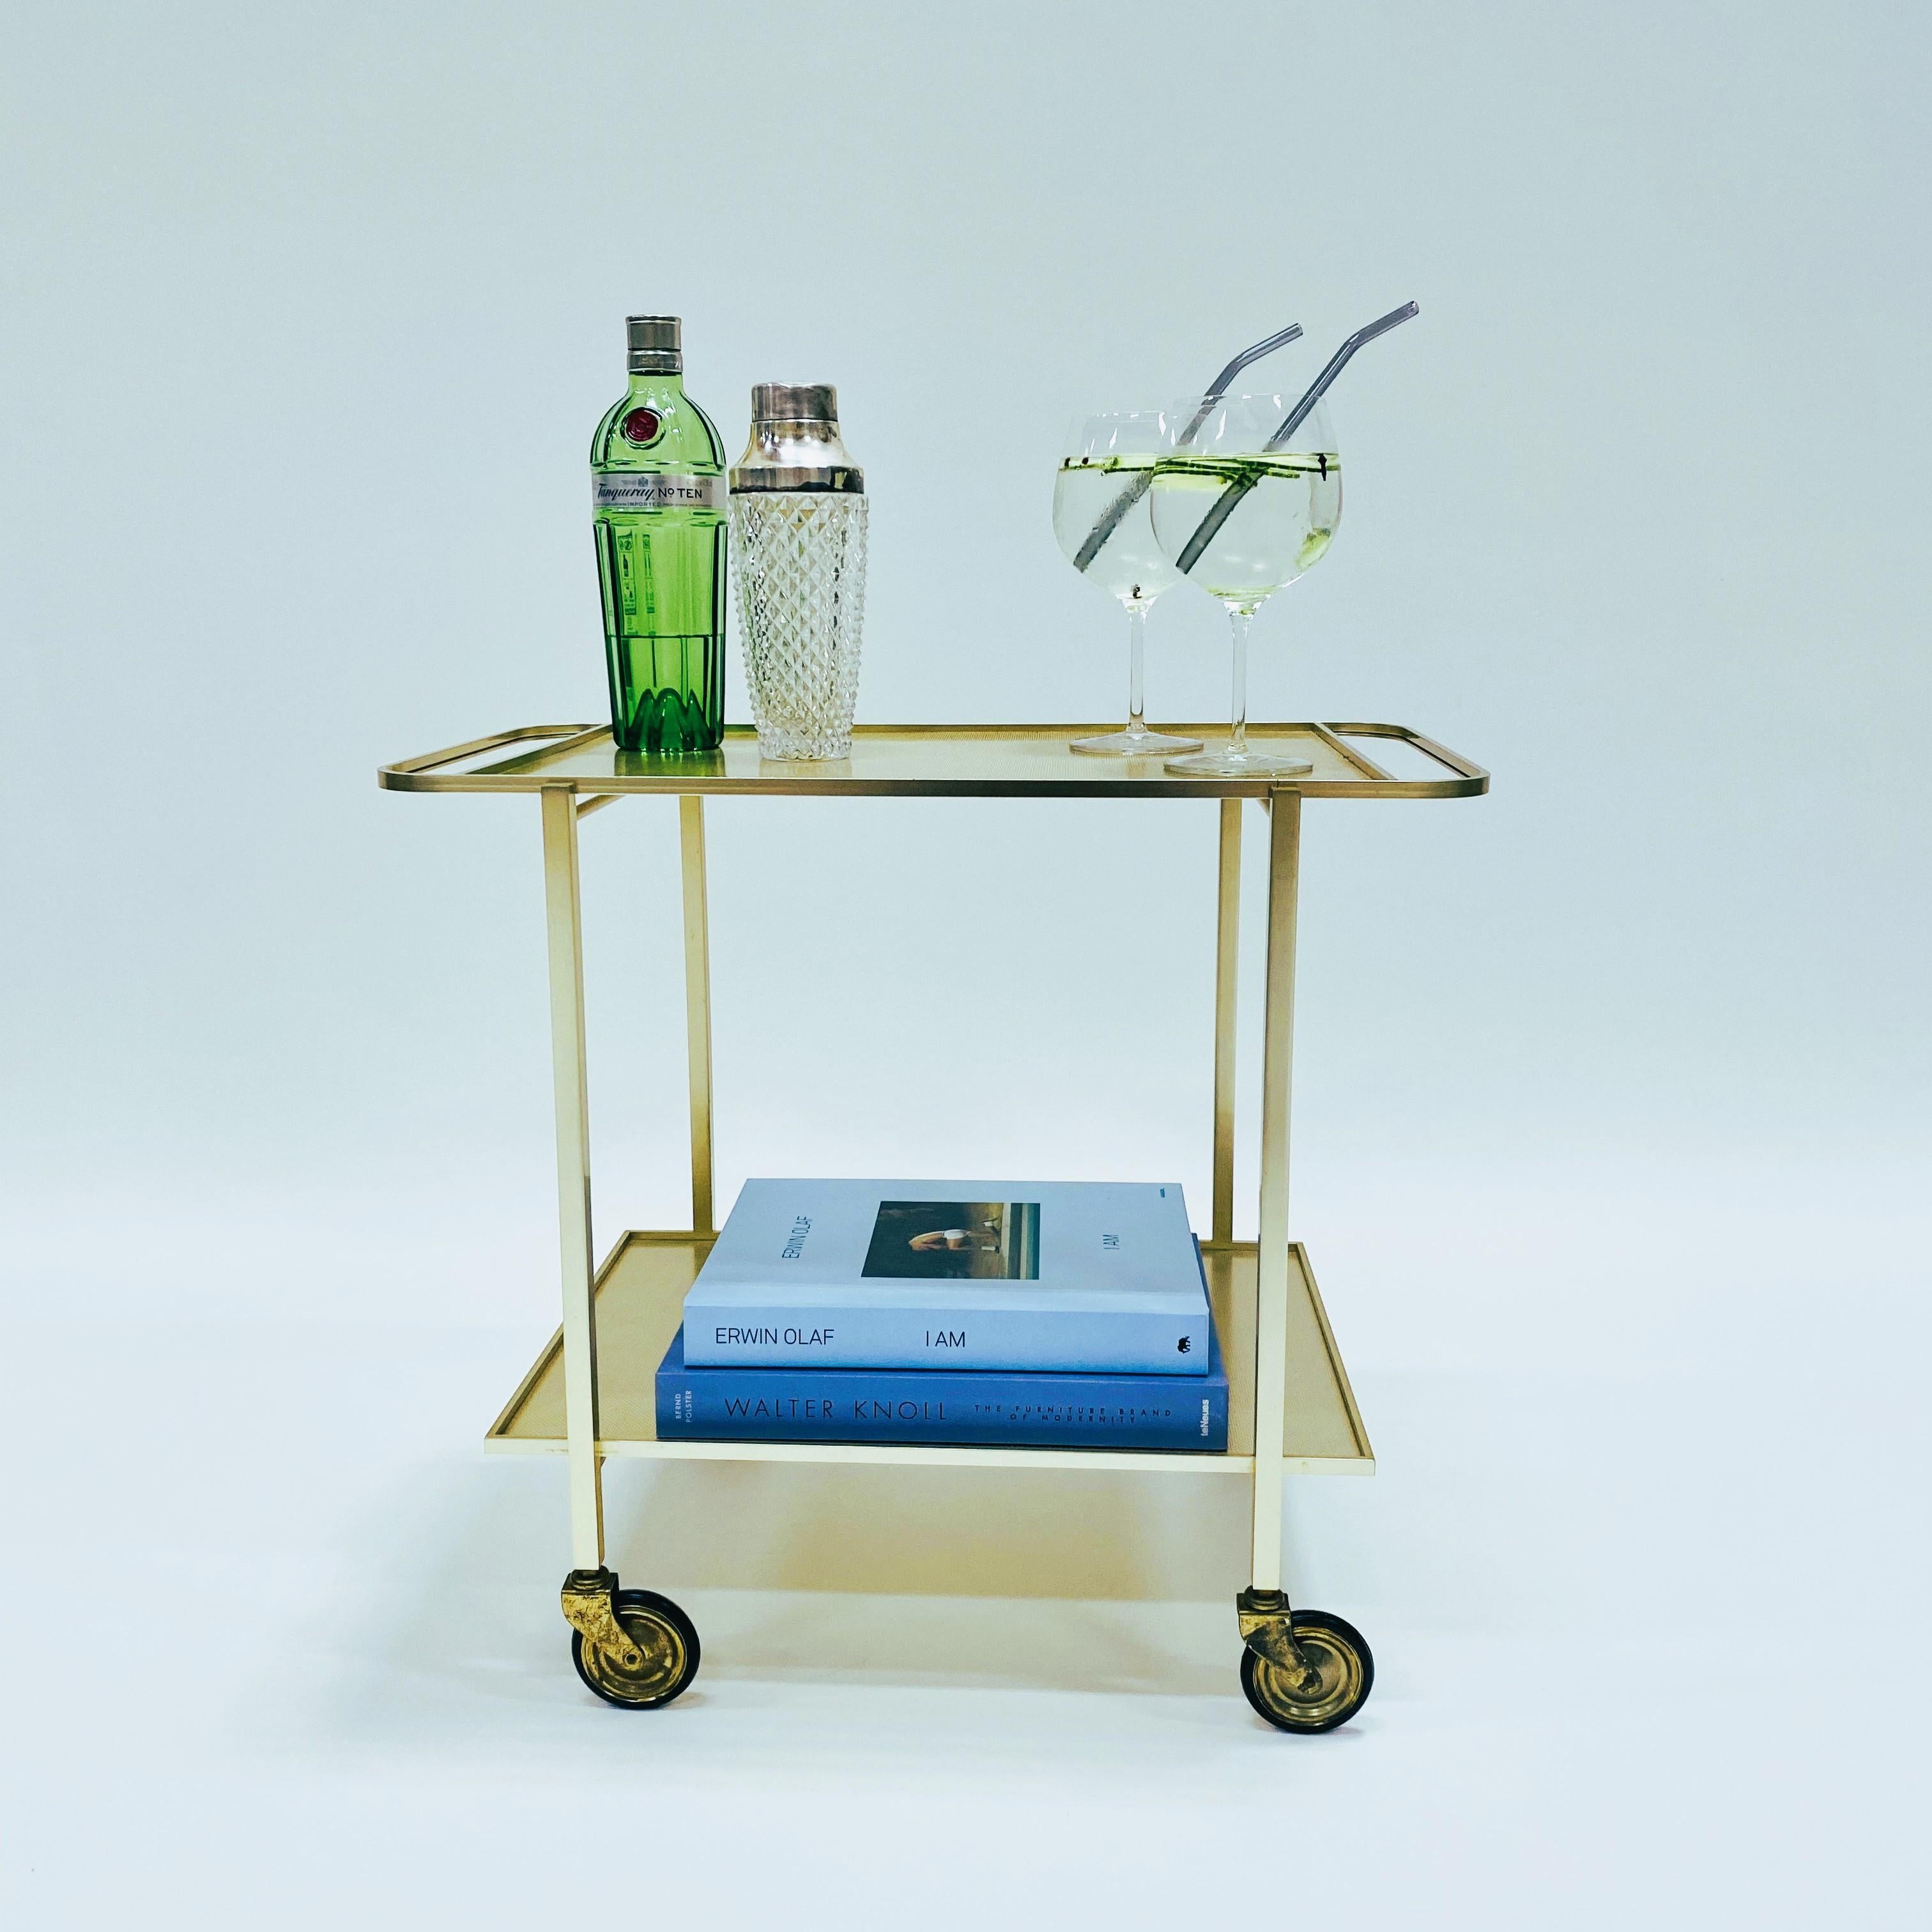 Mid century gold aluminum bar cart serving trolley by Werksentwurf Sihlmetall, Switzerland 1970s

If you're looking for a vintage bar trolley that will add a touch of glamour to your home, the Gold Aluminum Bar Trolley by Werkenswurf Sihlmetall is